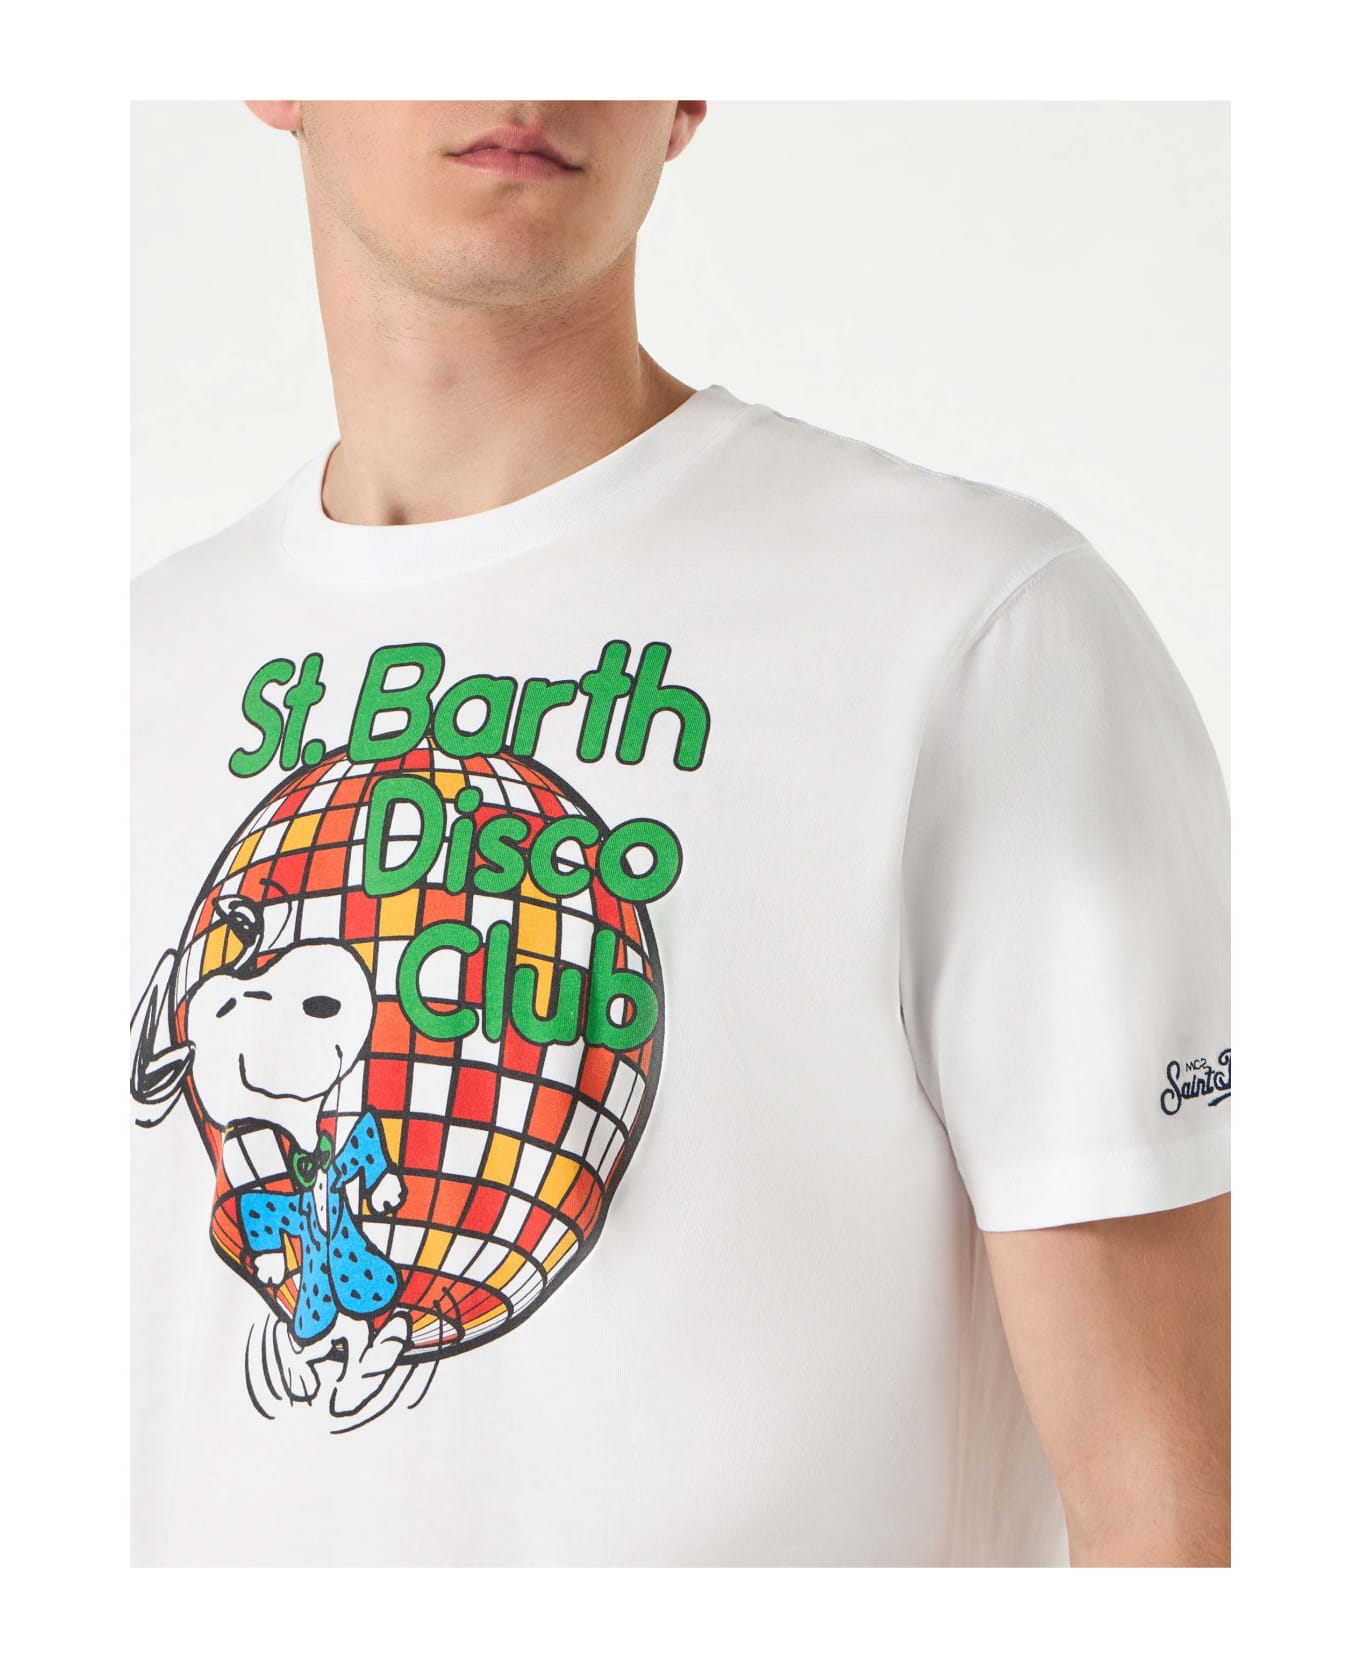 MC2 Saint Barth Man Cotton T-shirt With St. Barth Disco Club And Snoopy Print | Snoopy - Peanuts Special Edition - WHITE